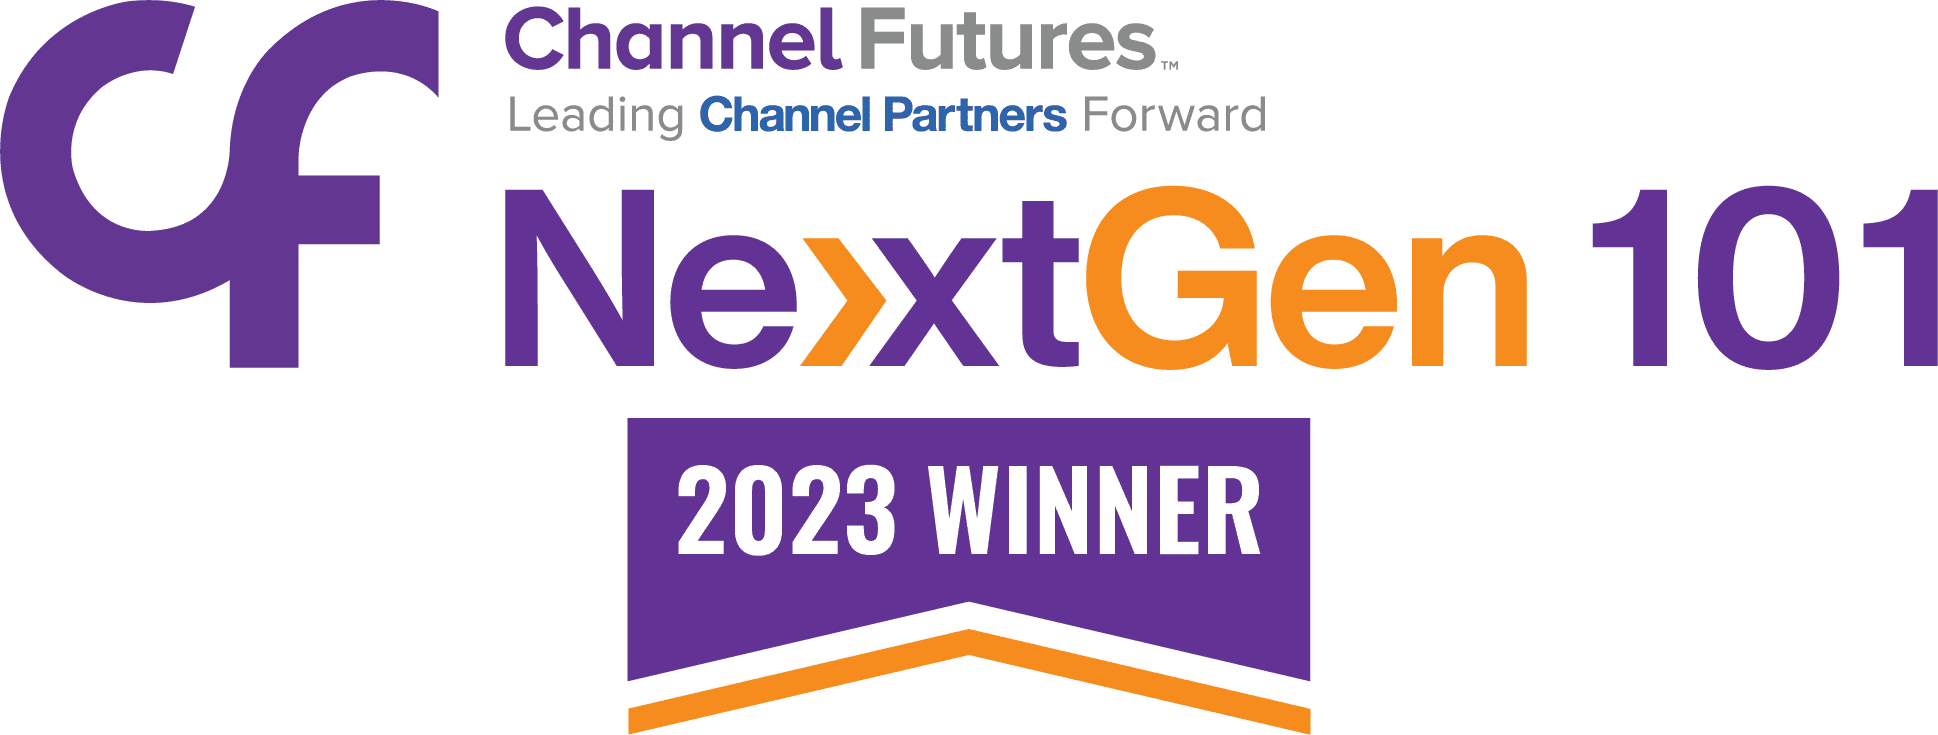 Channel Futures NextGen 2023 winner for provider of cybersecurity services.